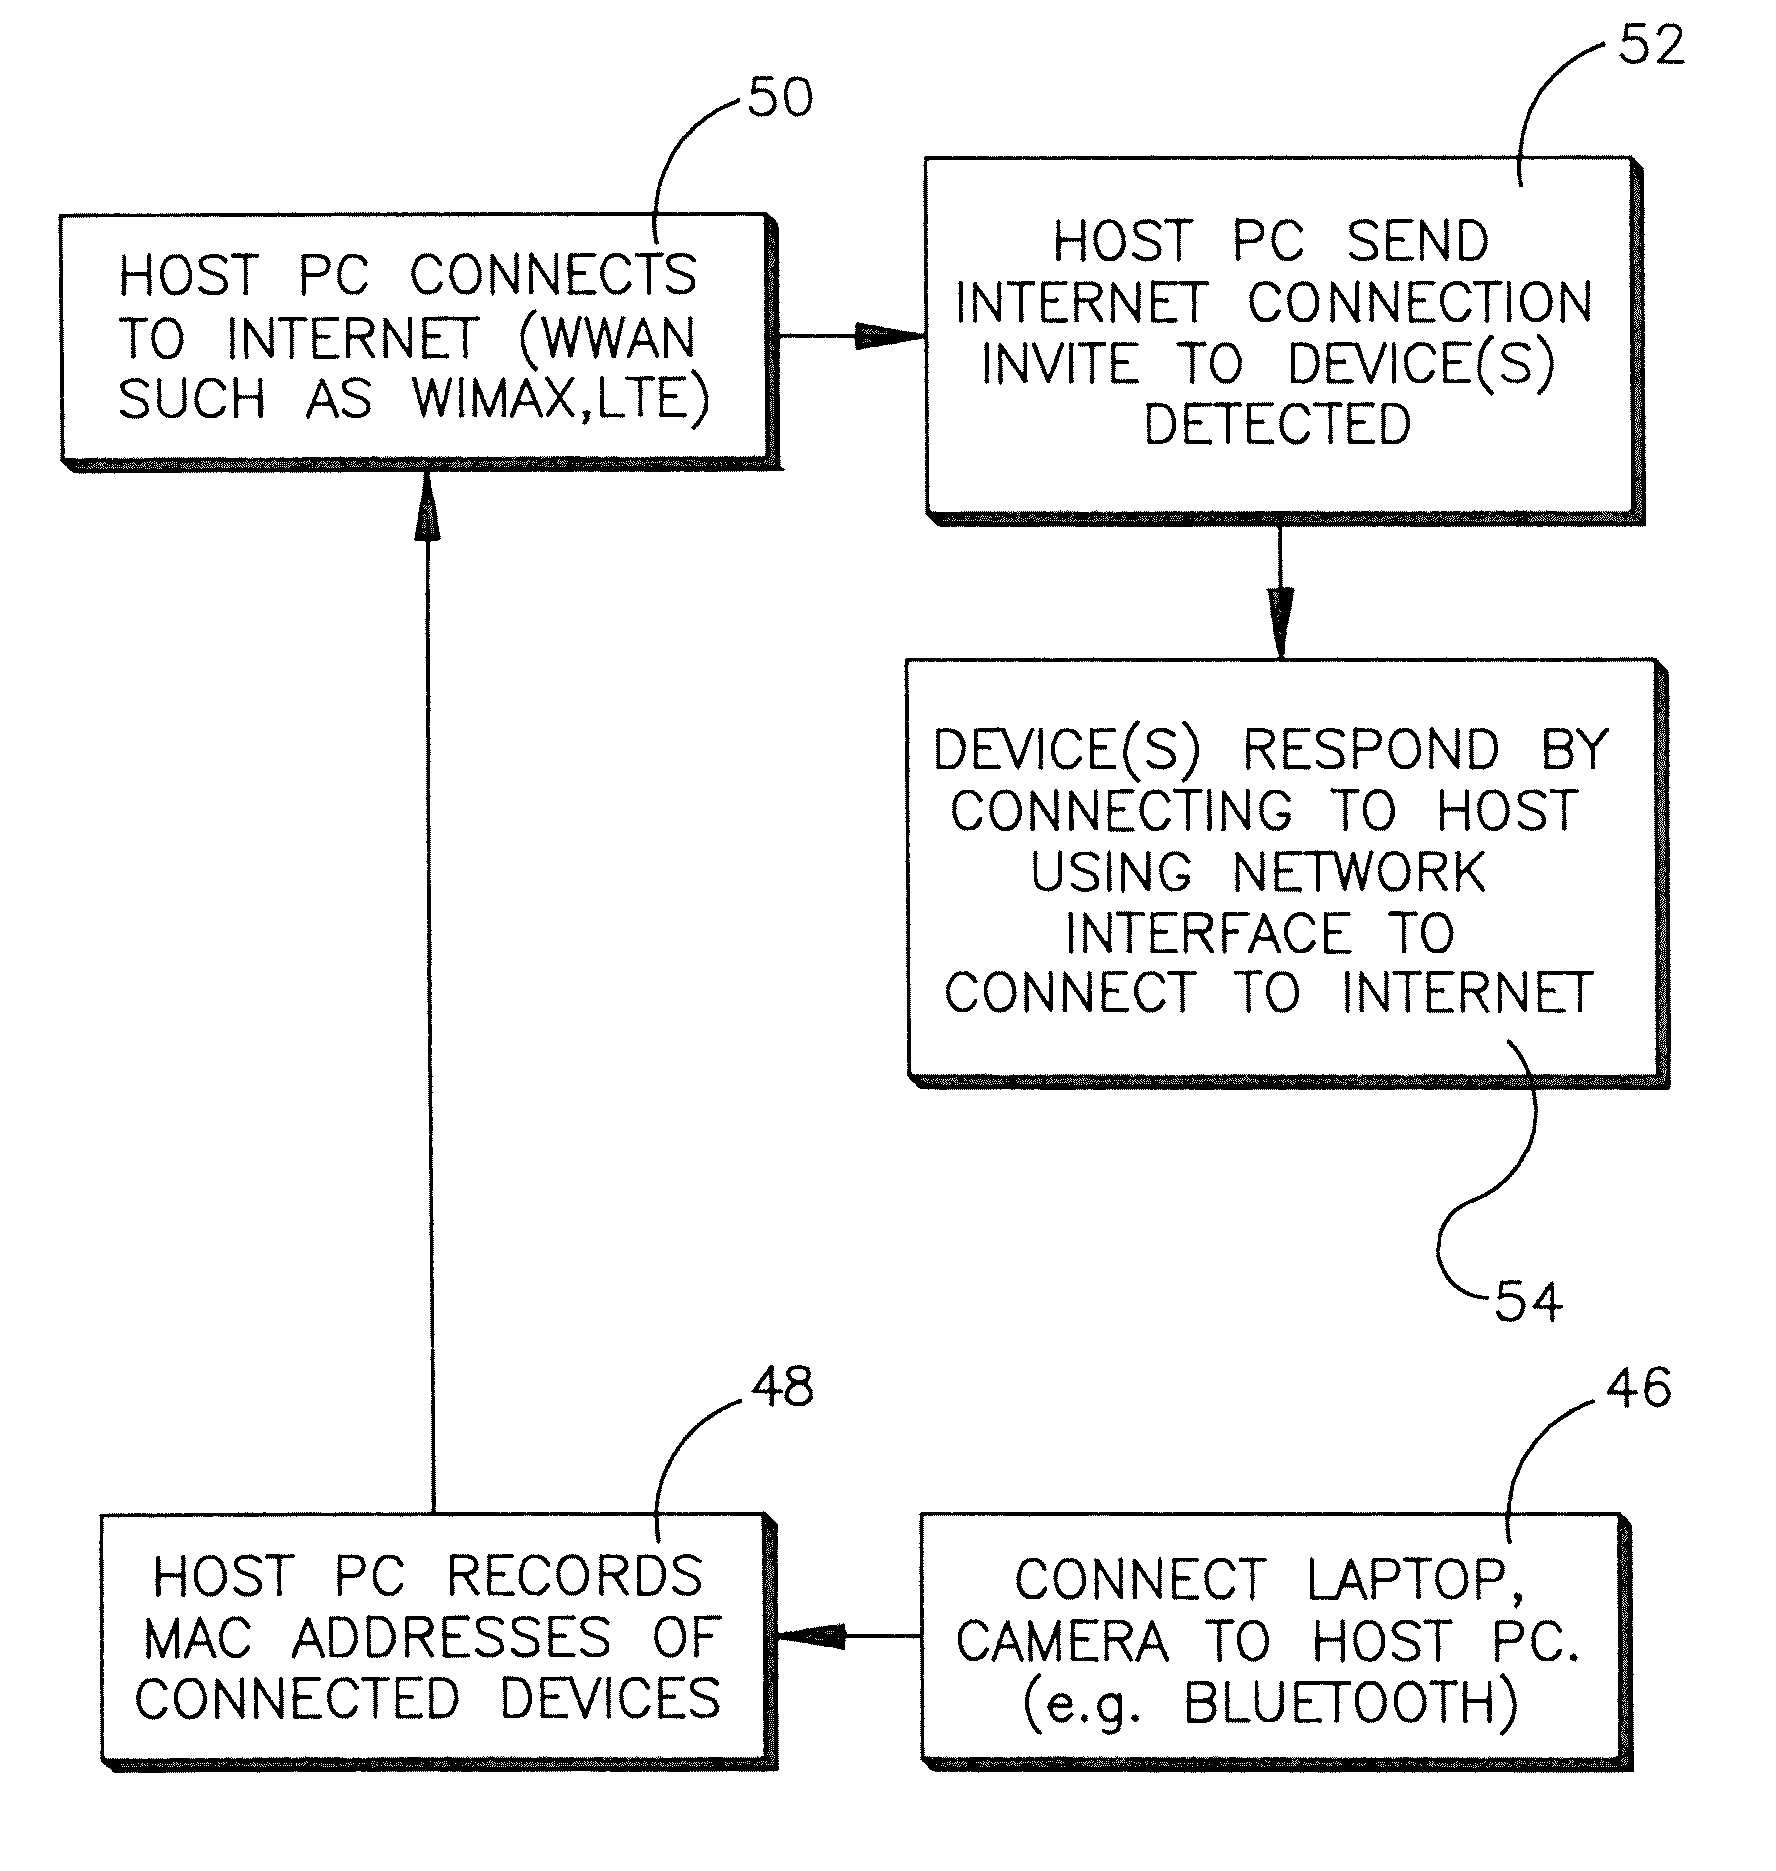 Automatic internet connection sharing among related devices